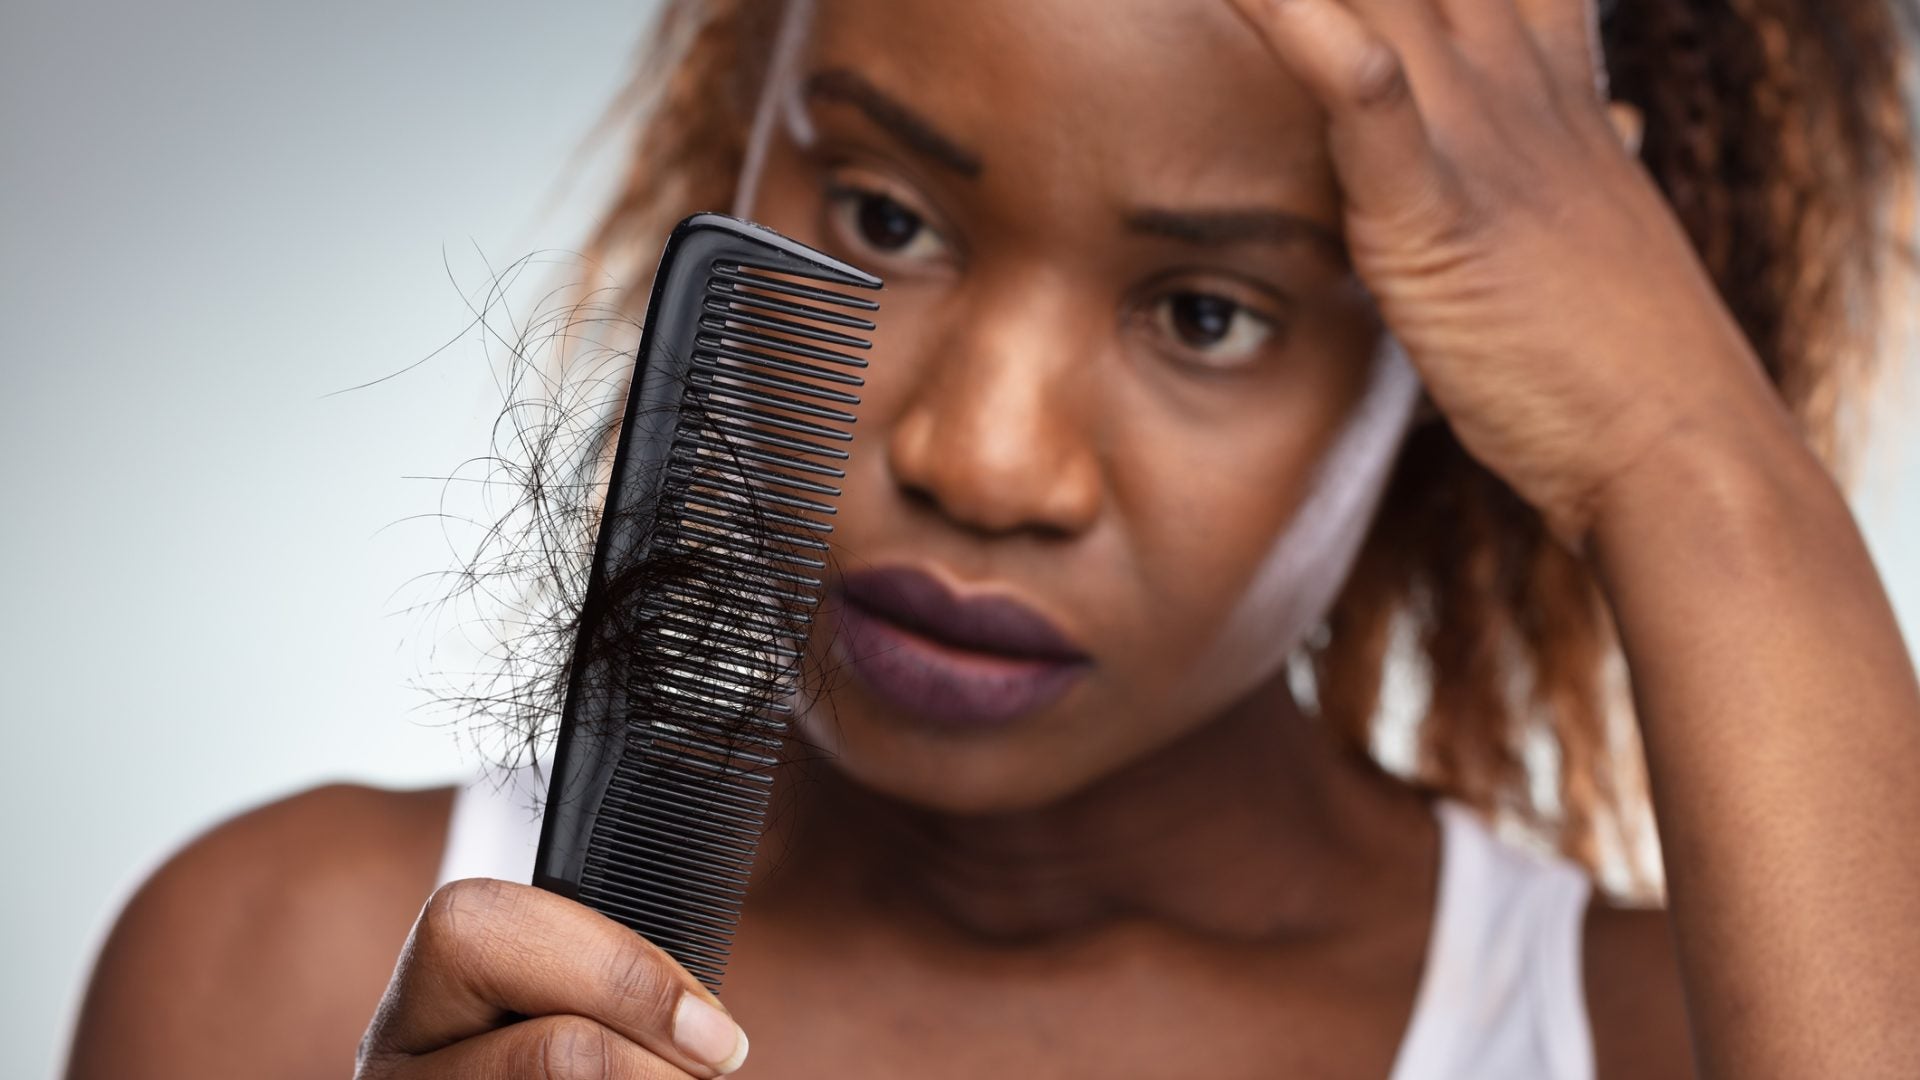 Ways Your Lifestyle Can Wreak Havoc On Your Hair